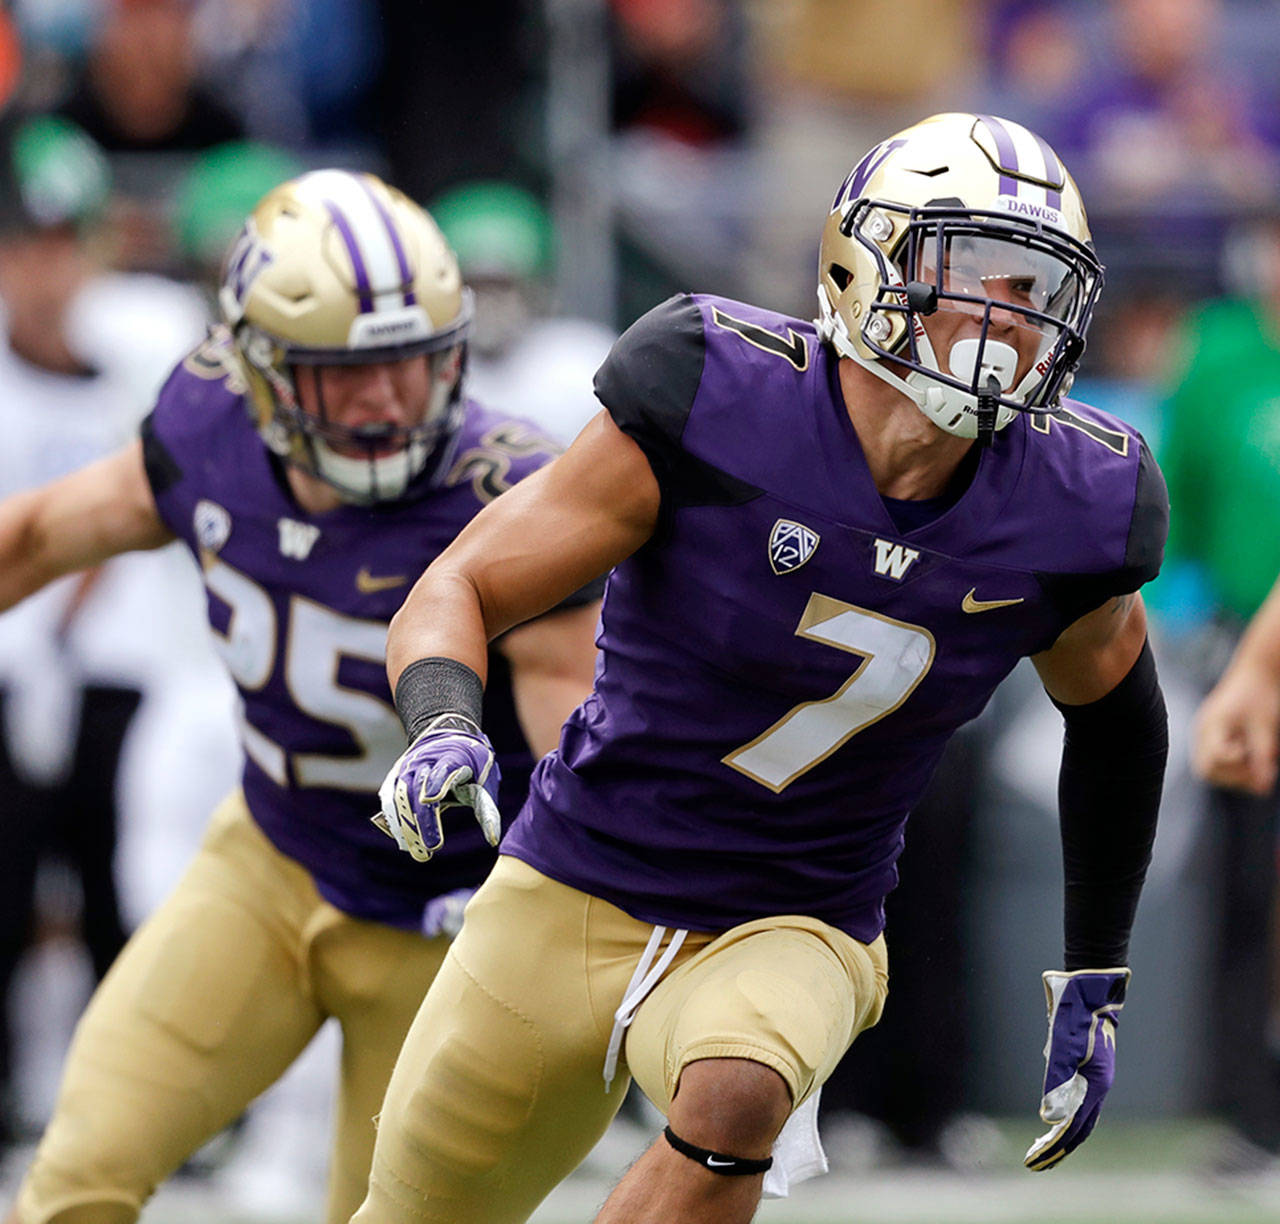 Washington safety Taylor Rapp (7) and linebacker Ben Burr-Kirven (25) were named to the Associated Press All-America Football Teams on Monday. Burr-Kirven was a first-team selection and Rapp made the second team. (AP Photo/Elaine Thompson)